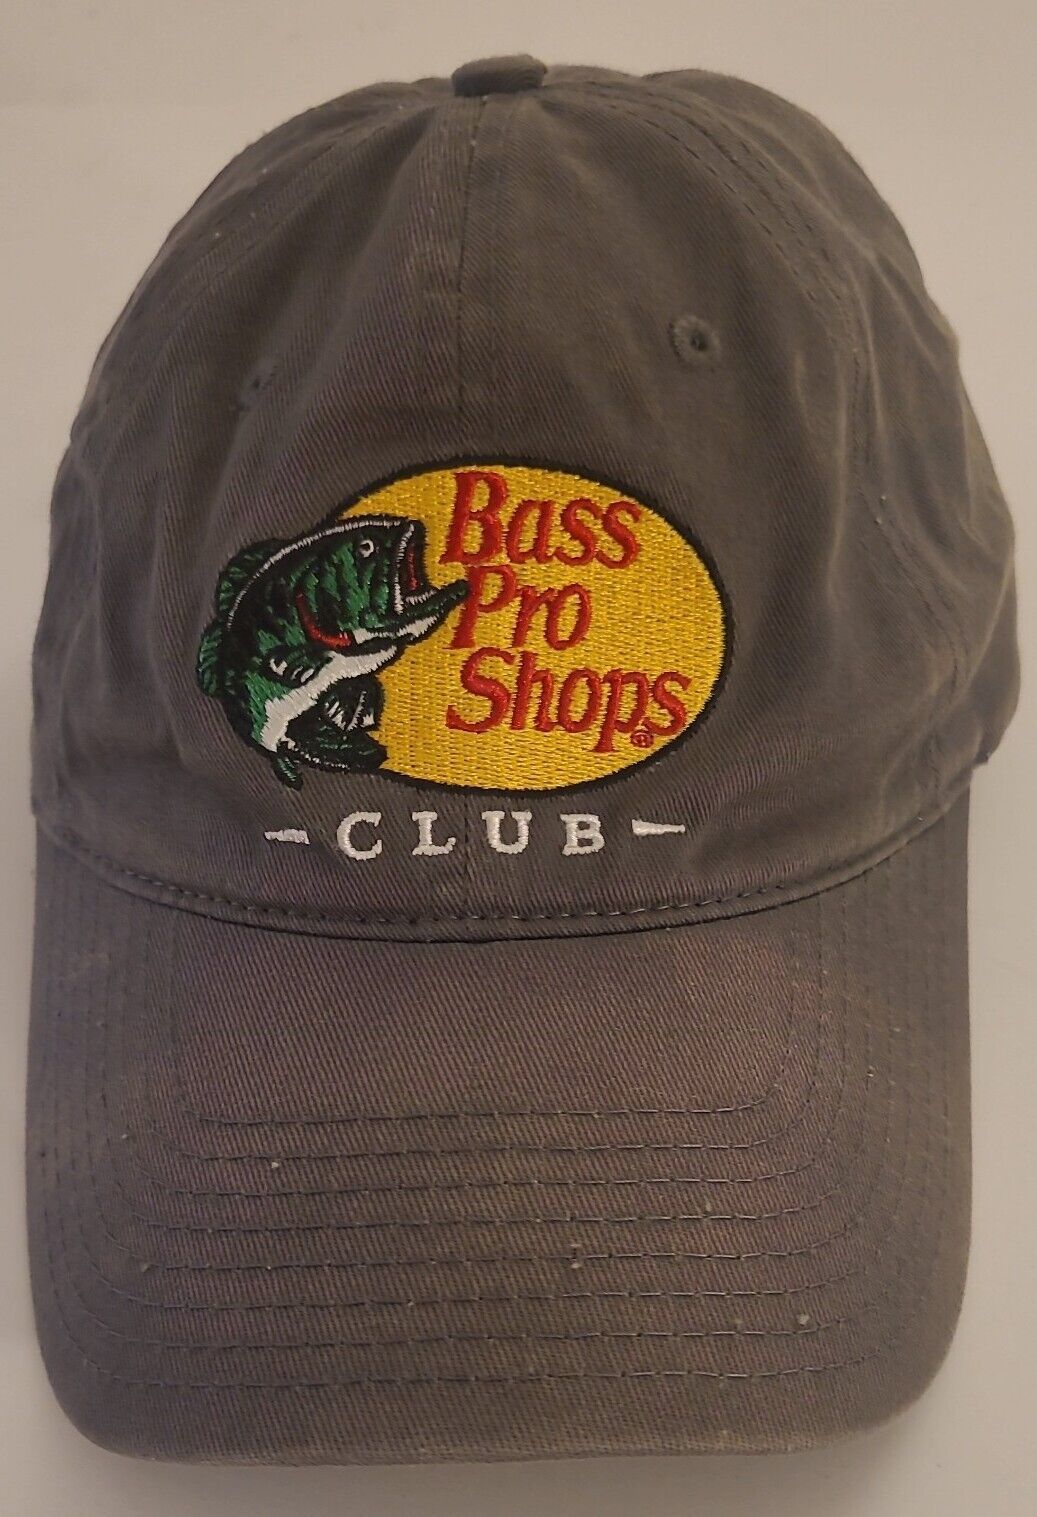 Primary image for Bass Pro Shops Men's Embroidered Baseball Cap